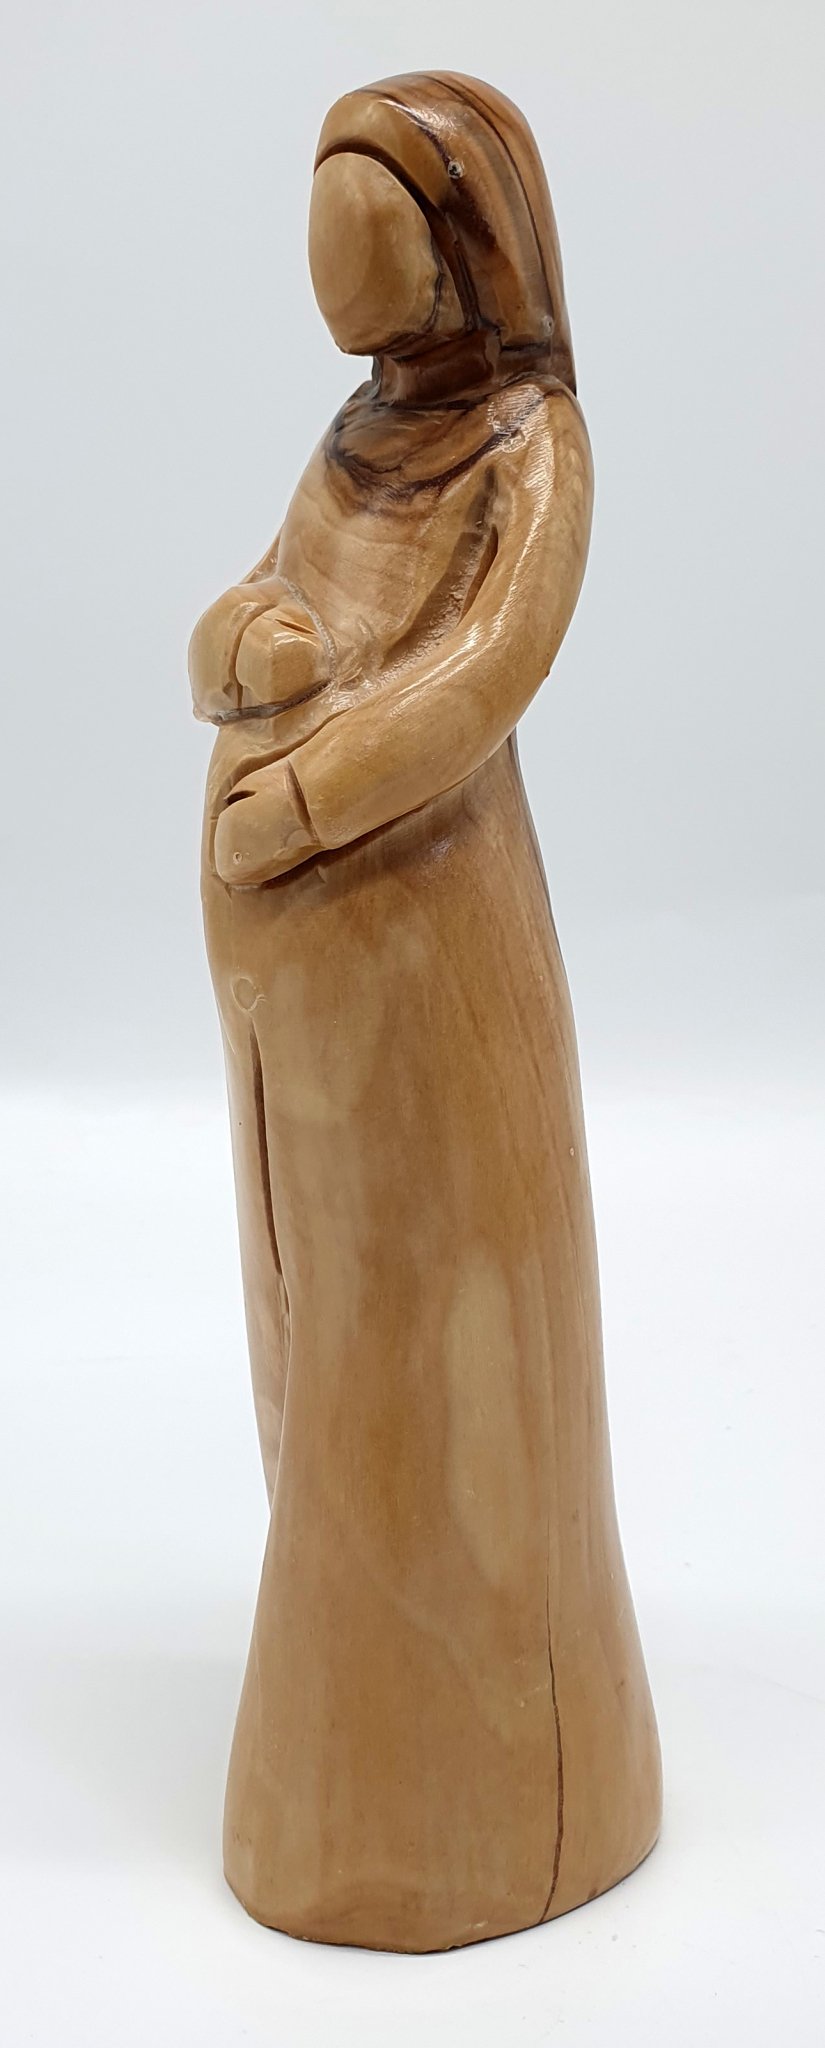 A testament to the Blessed Mother carrying Baby in her womb. This exquisite 8-inch masterpiece is meticulously handcrafted in Bethlehem by Zuluf artisans - Zuluf